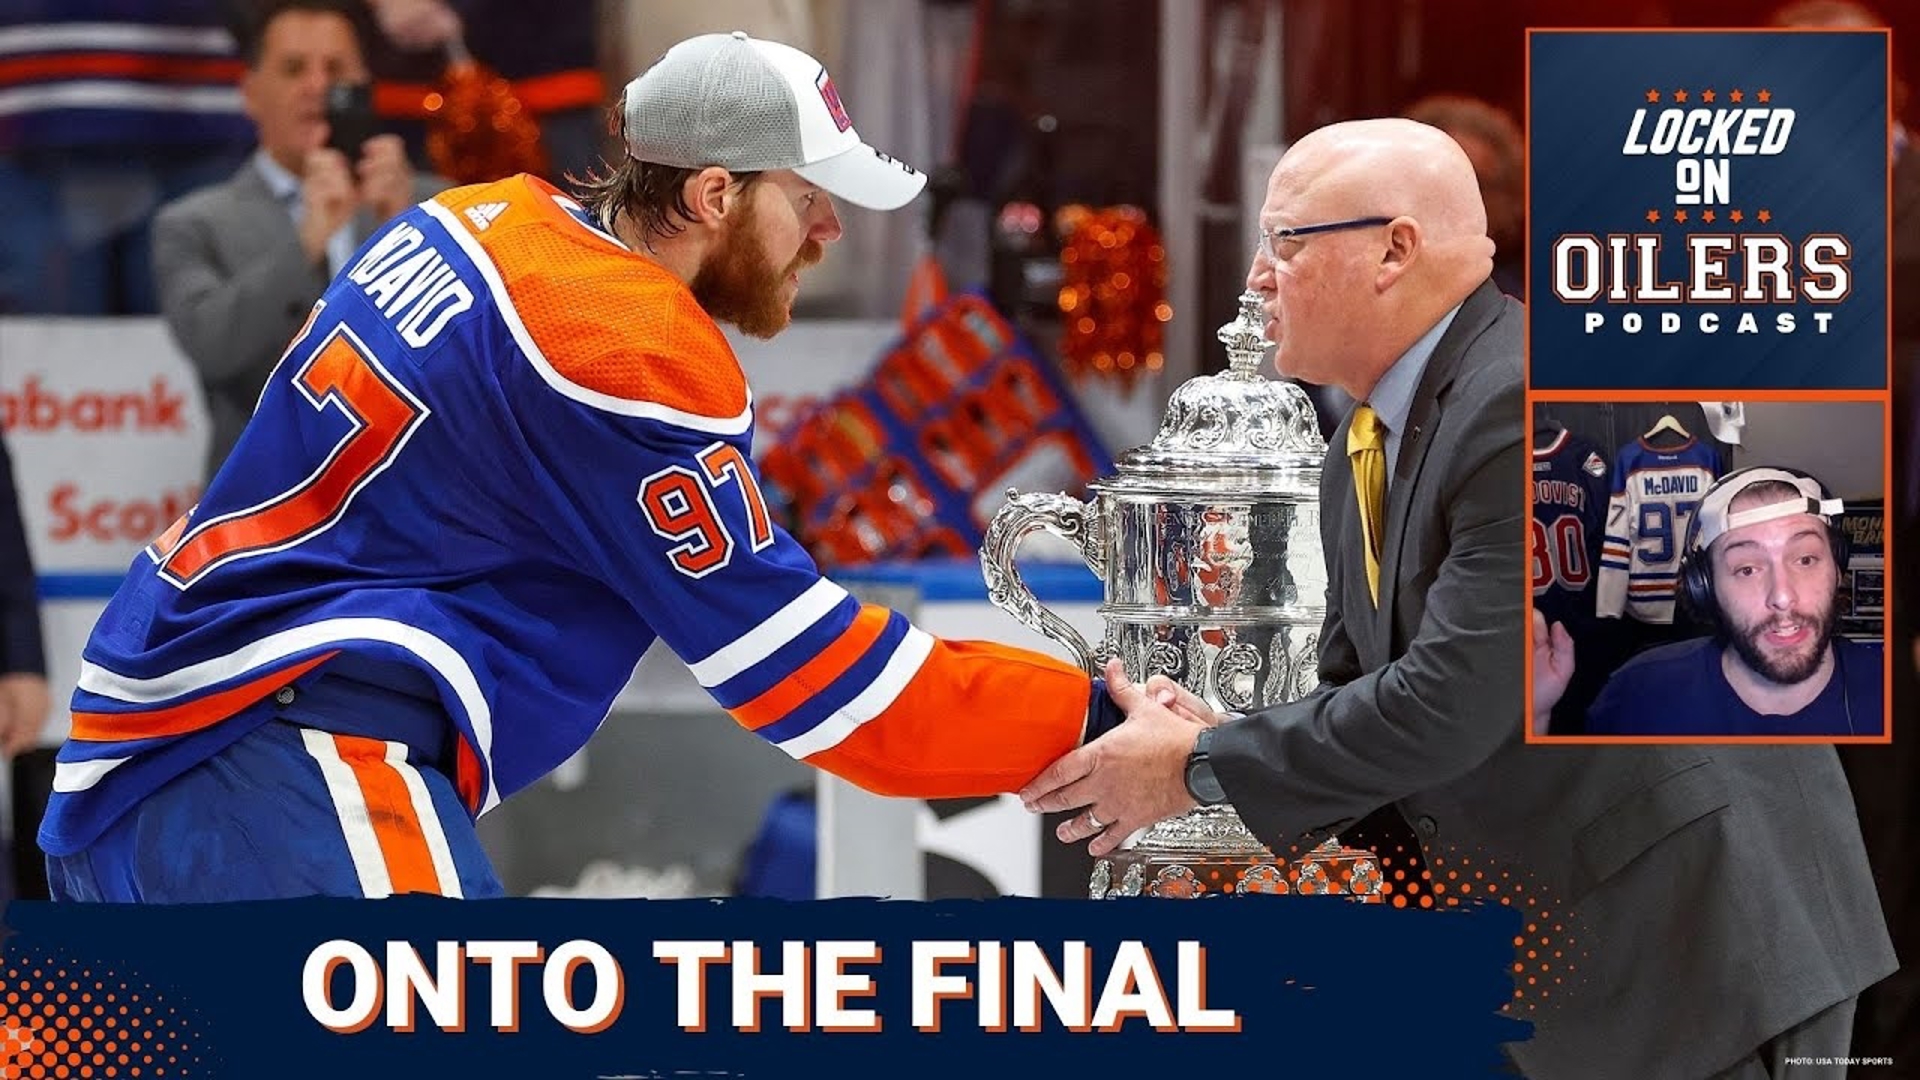 In this long overdue episode, Nick Zararis' dives into the Edmonton Oilers' spectacular victory over the Dallas Stars in Game 6 of the Western Conference Final.